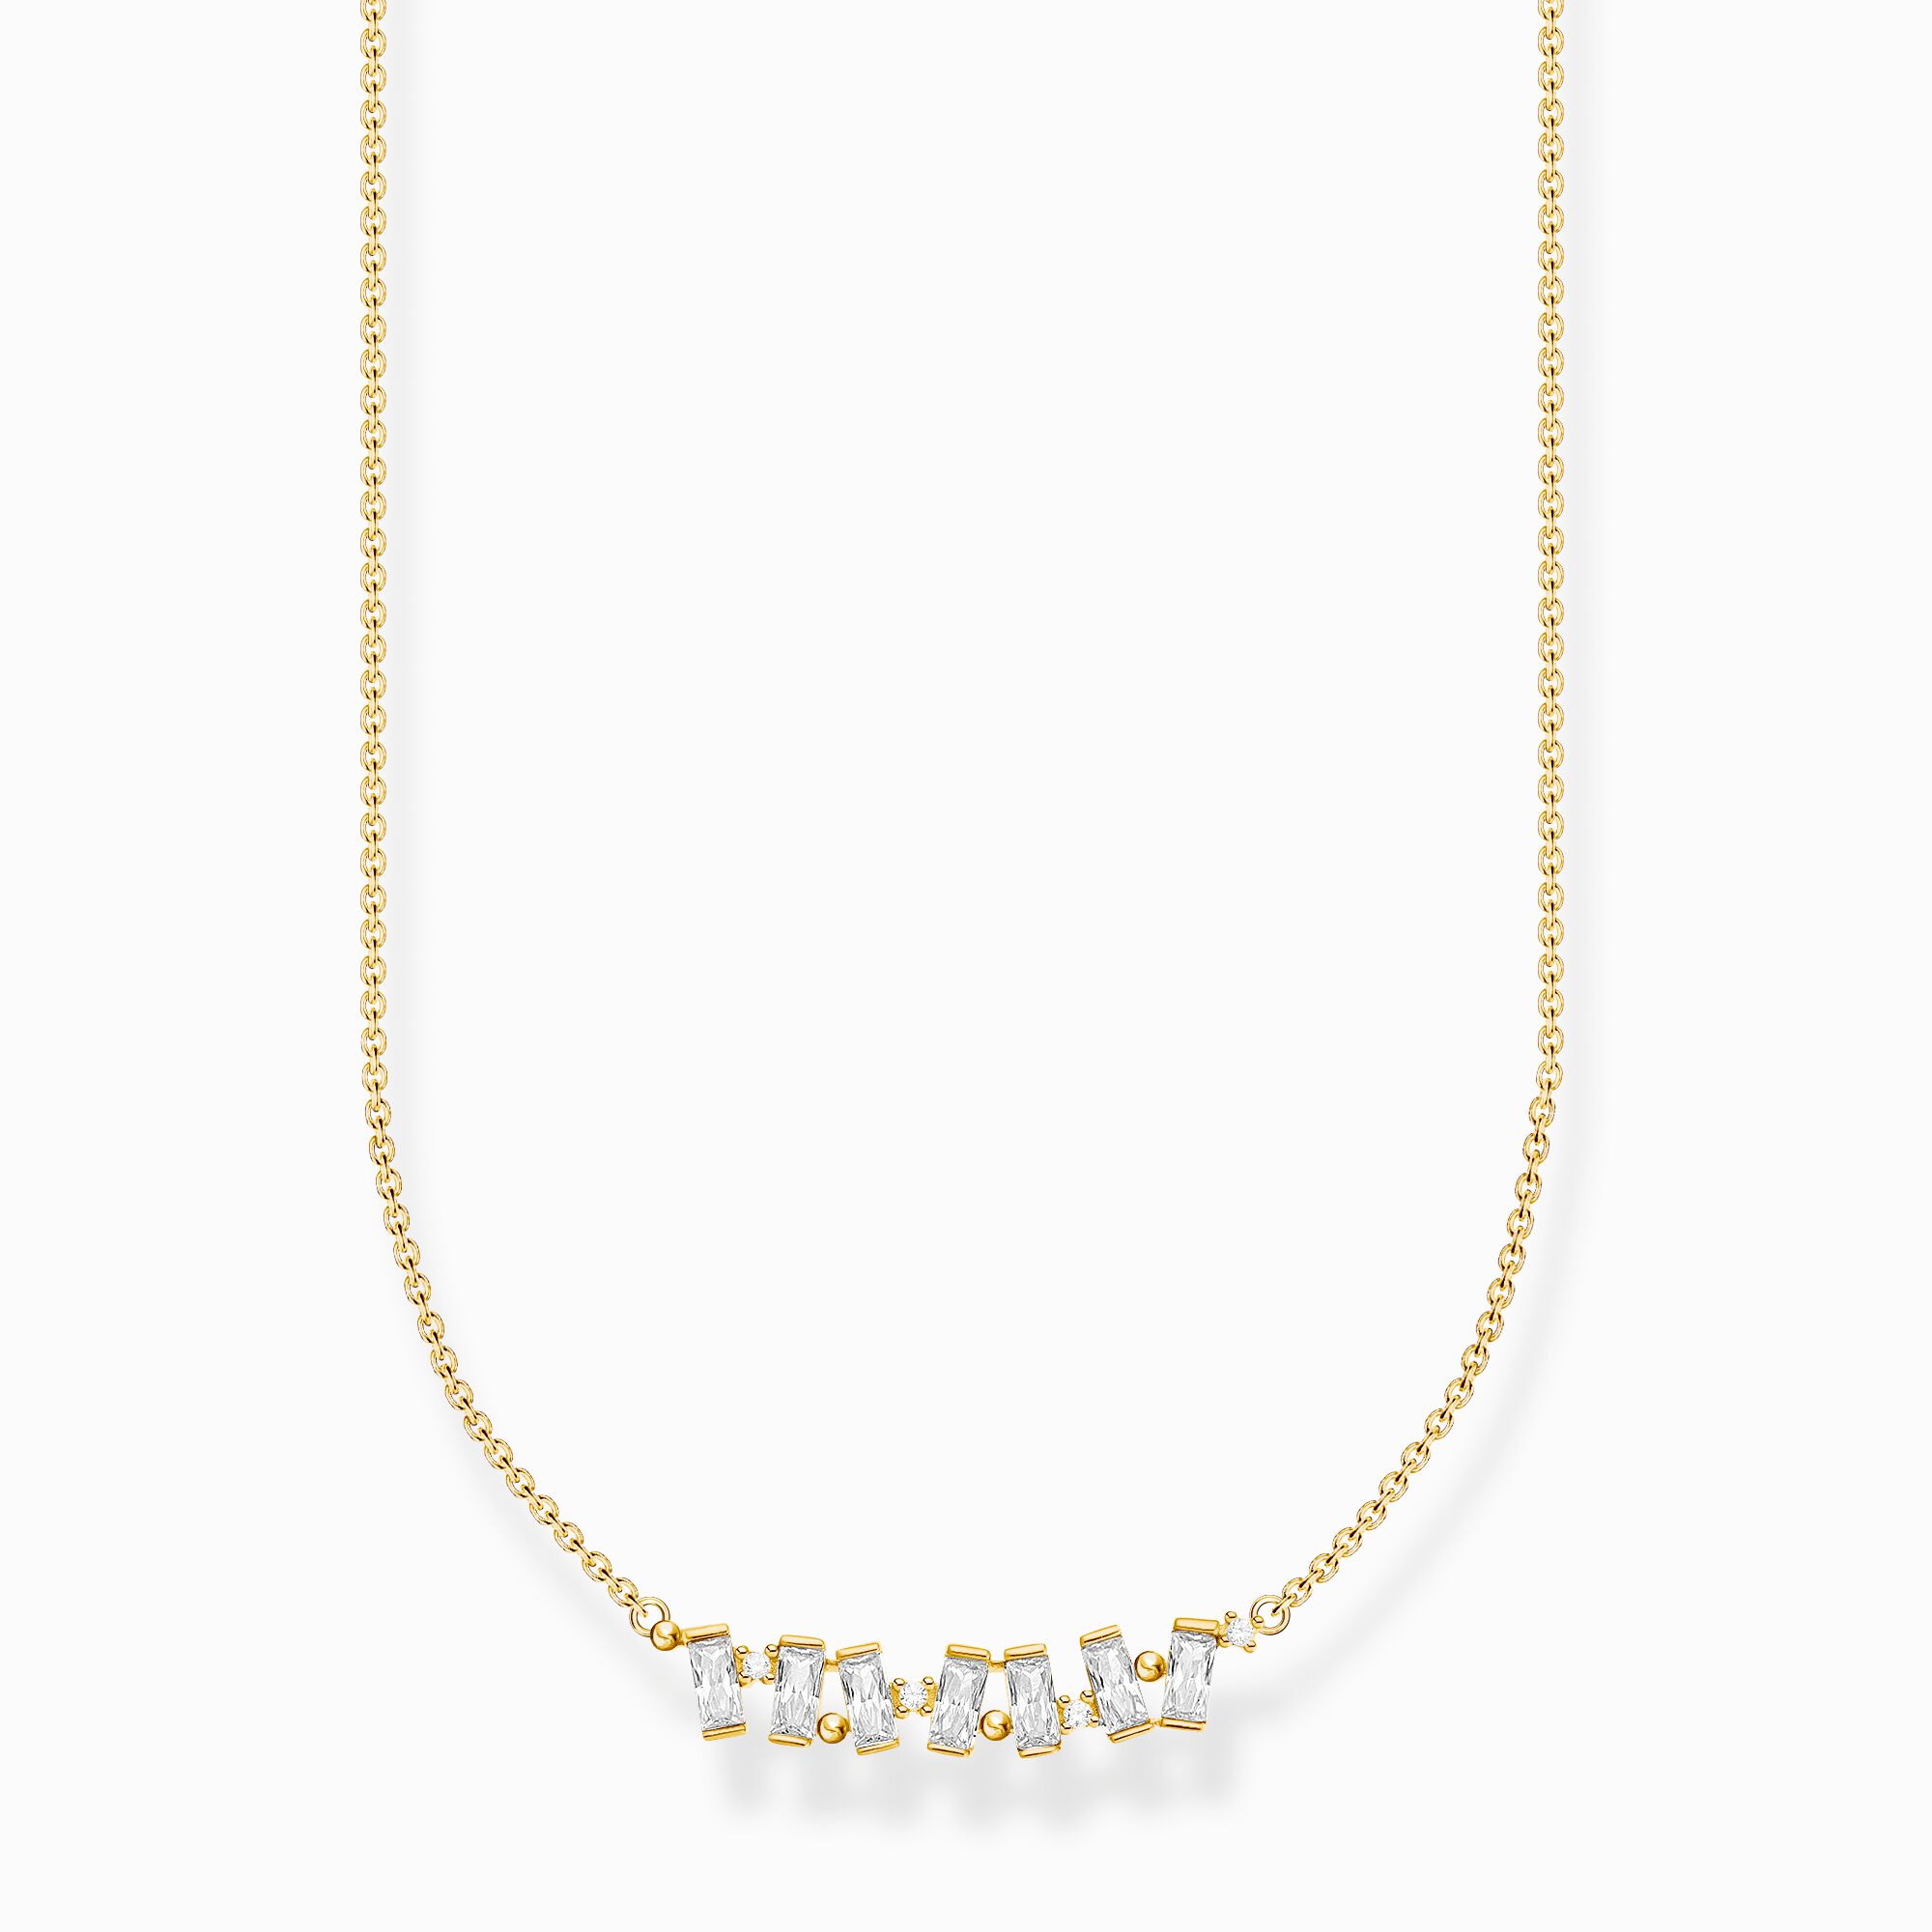 Necklace white stones gold from the Charming Collection collection in the THOMAS SABO online store